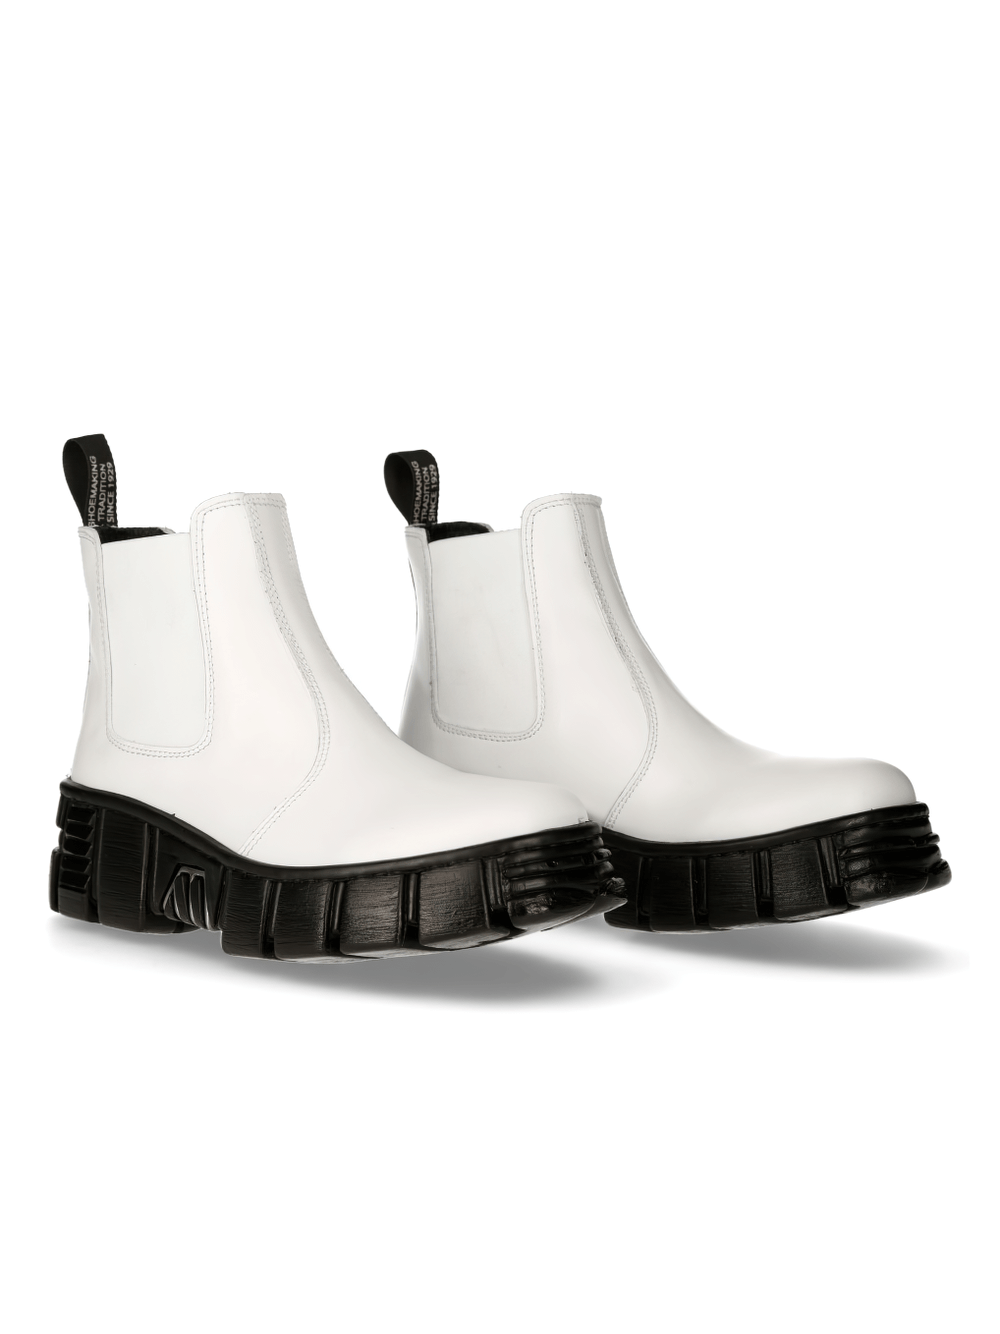 NEW ROCK Chic White Leather Military Ankle Boots